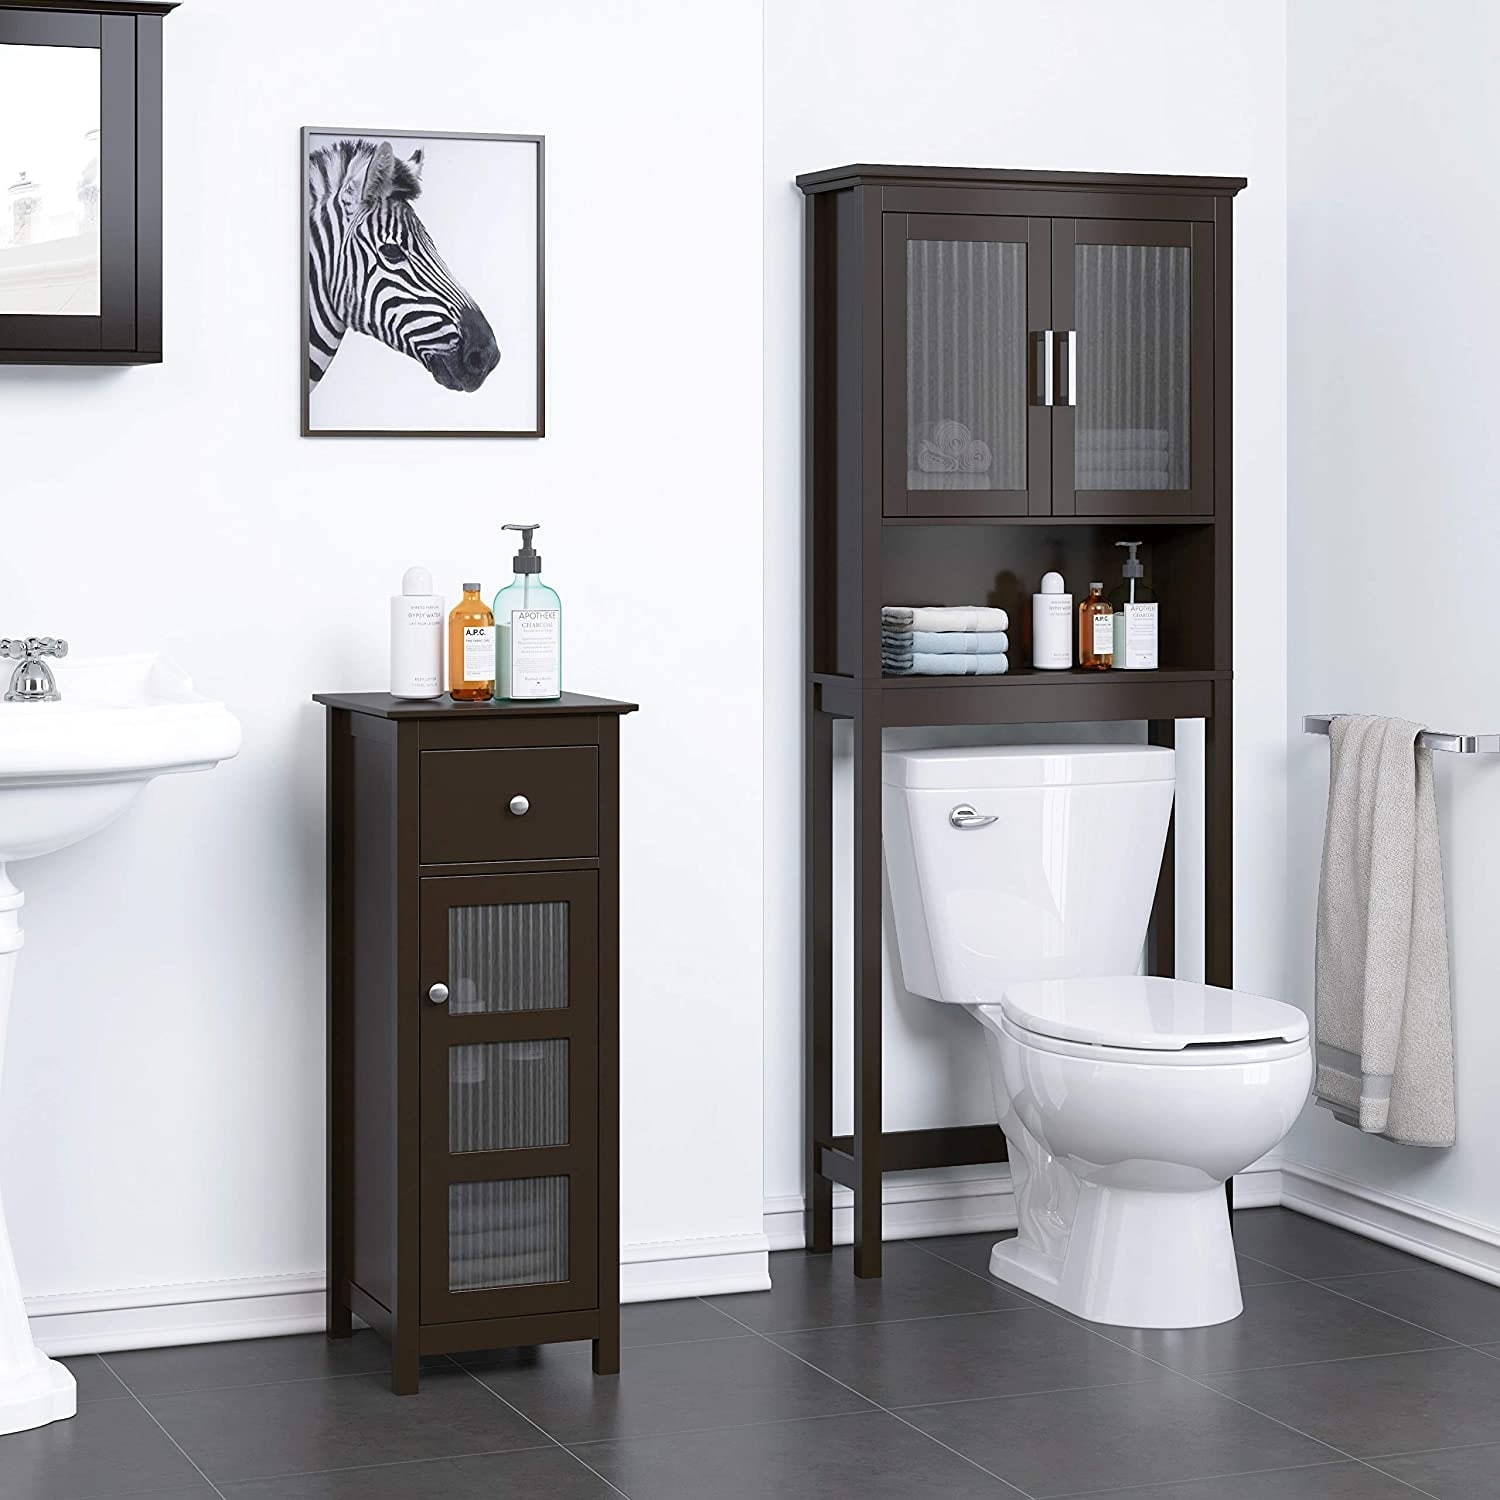 https://ak1.ostkcdn.com/images/products/is/images/direct/91817437668b2369bfb18aa2b228c3c4462aee43/Spirich-Home-Bathroom-Shelf-Over-The-Toilet%2C-Bathroom-Cabinet-Organizer-with-Moru-Tempered-Glass-Door.jpg